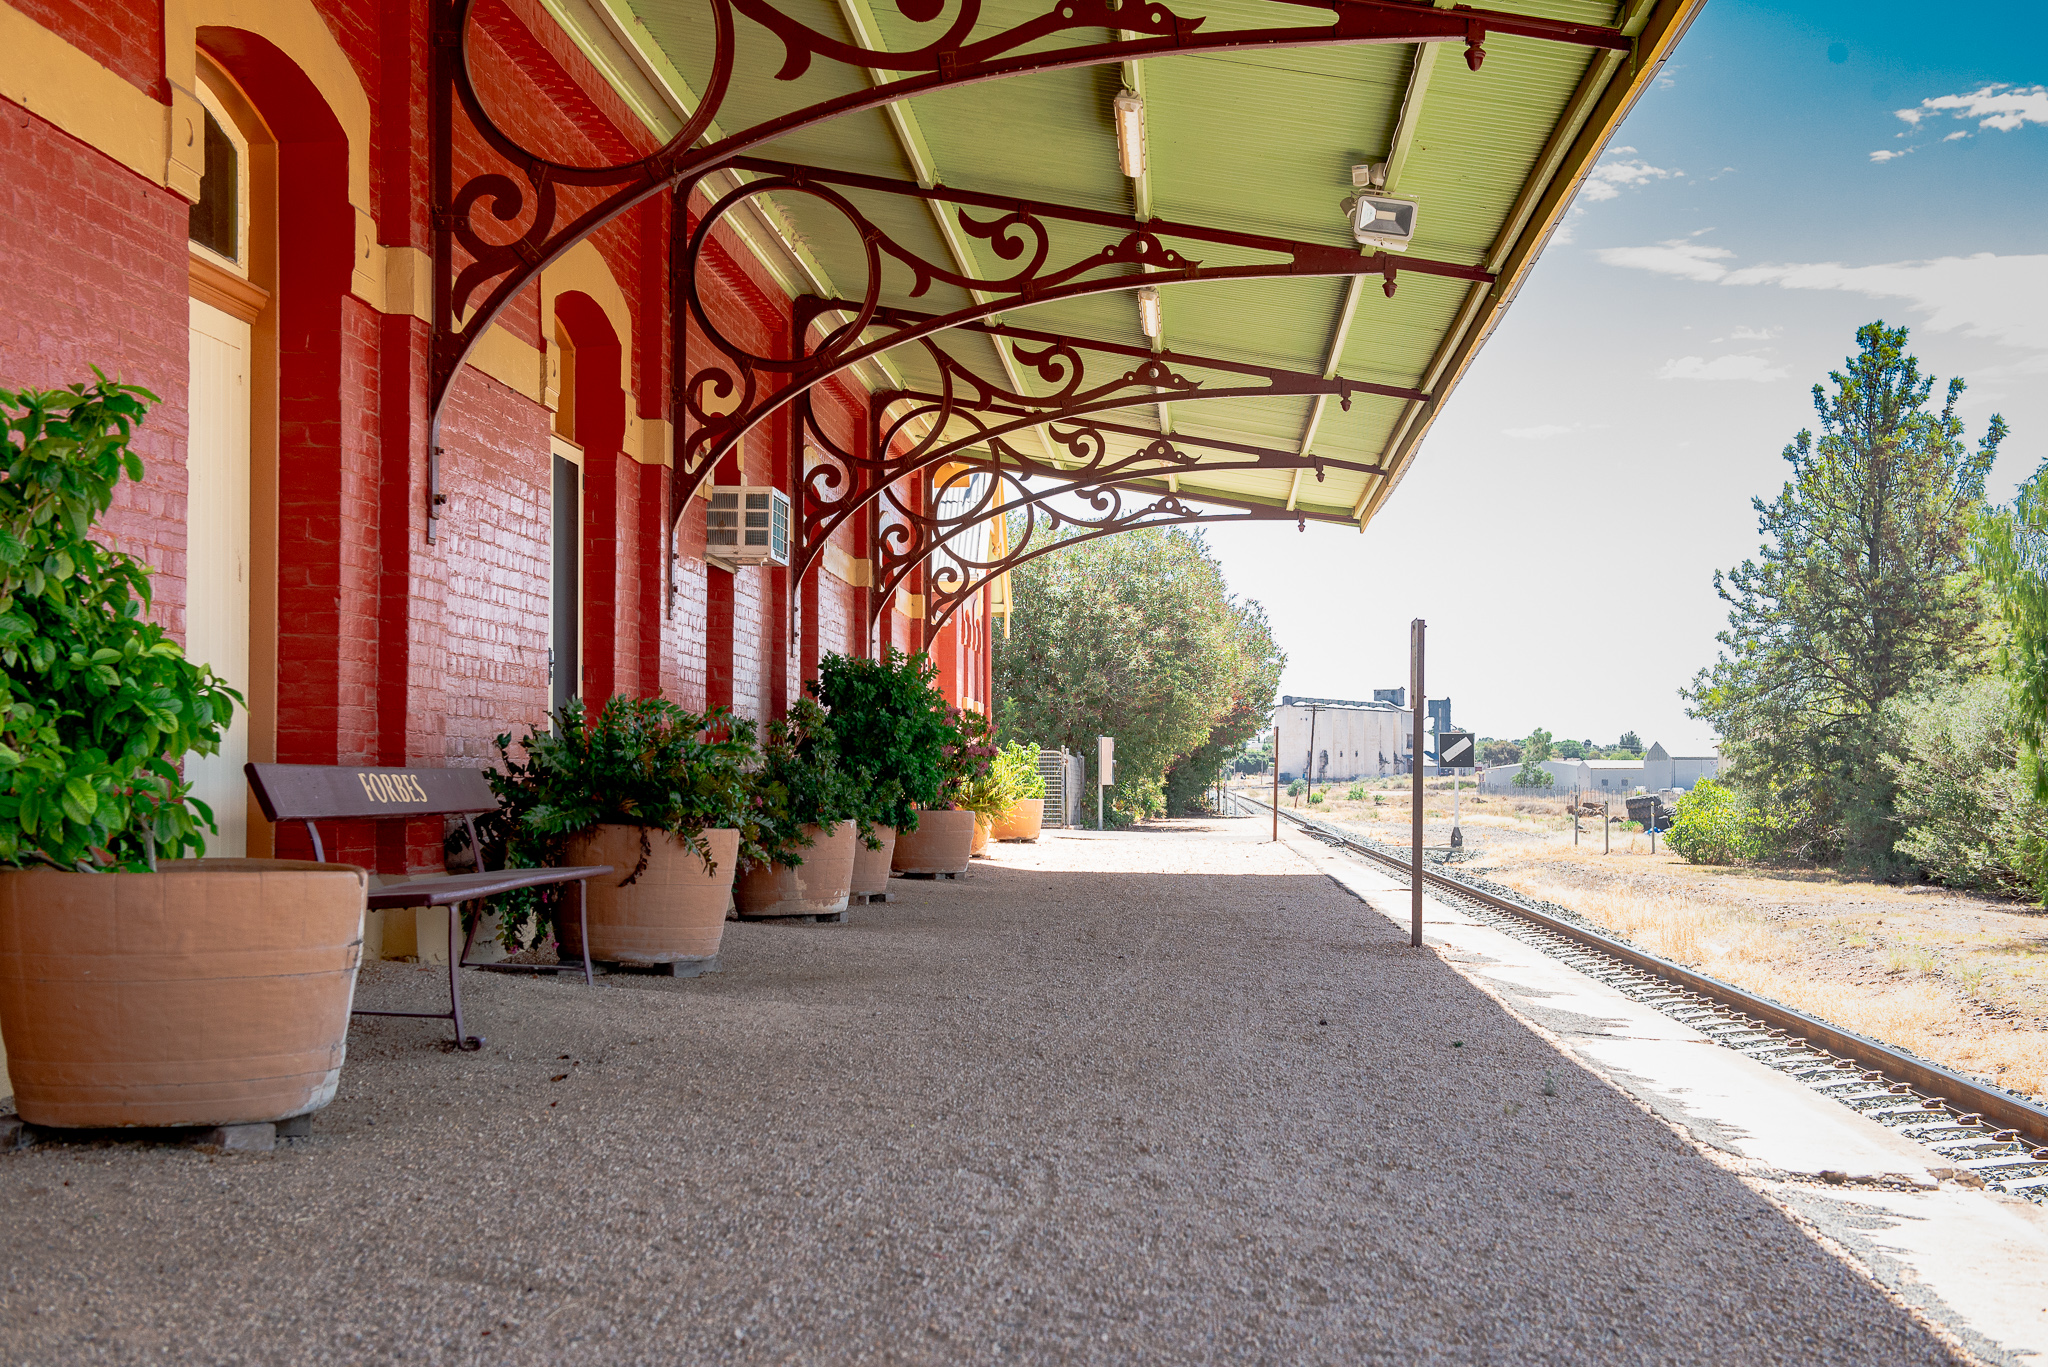 Forbes railway station, New South Wales